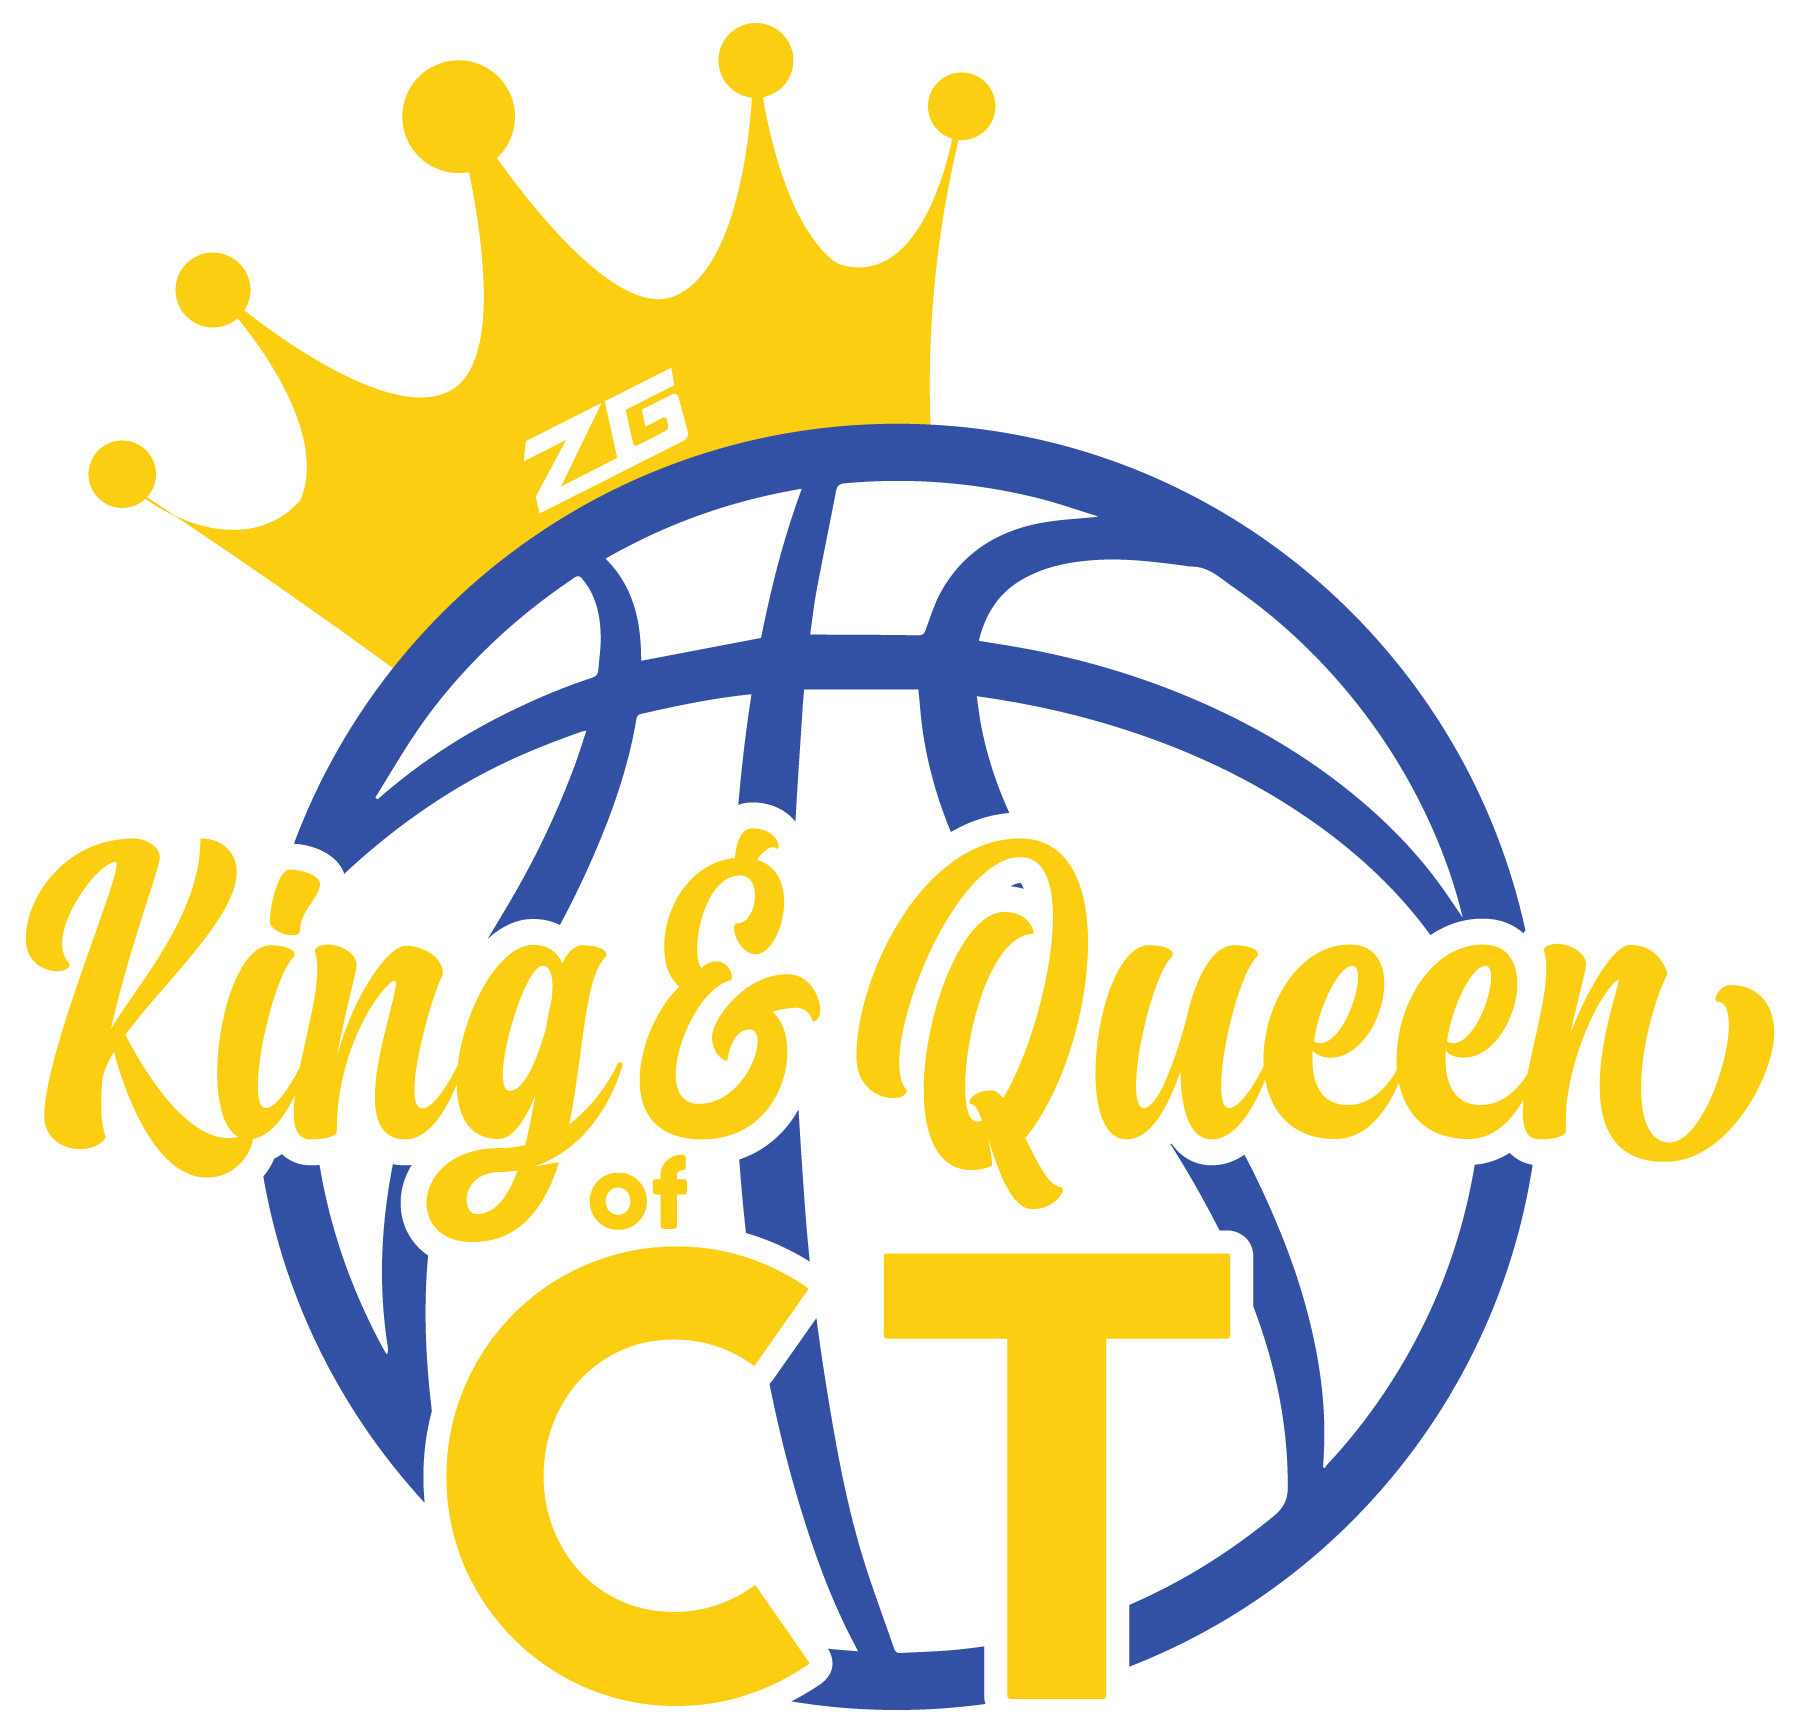 King and Queen of CT (2)